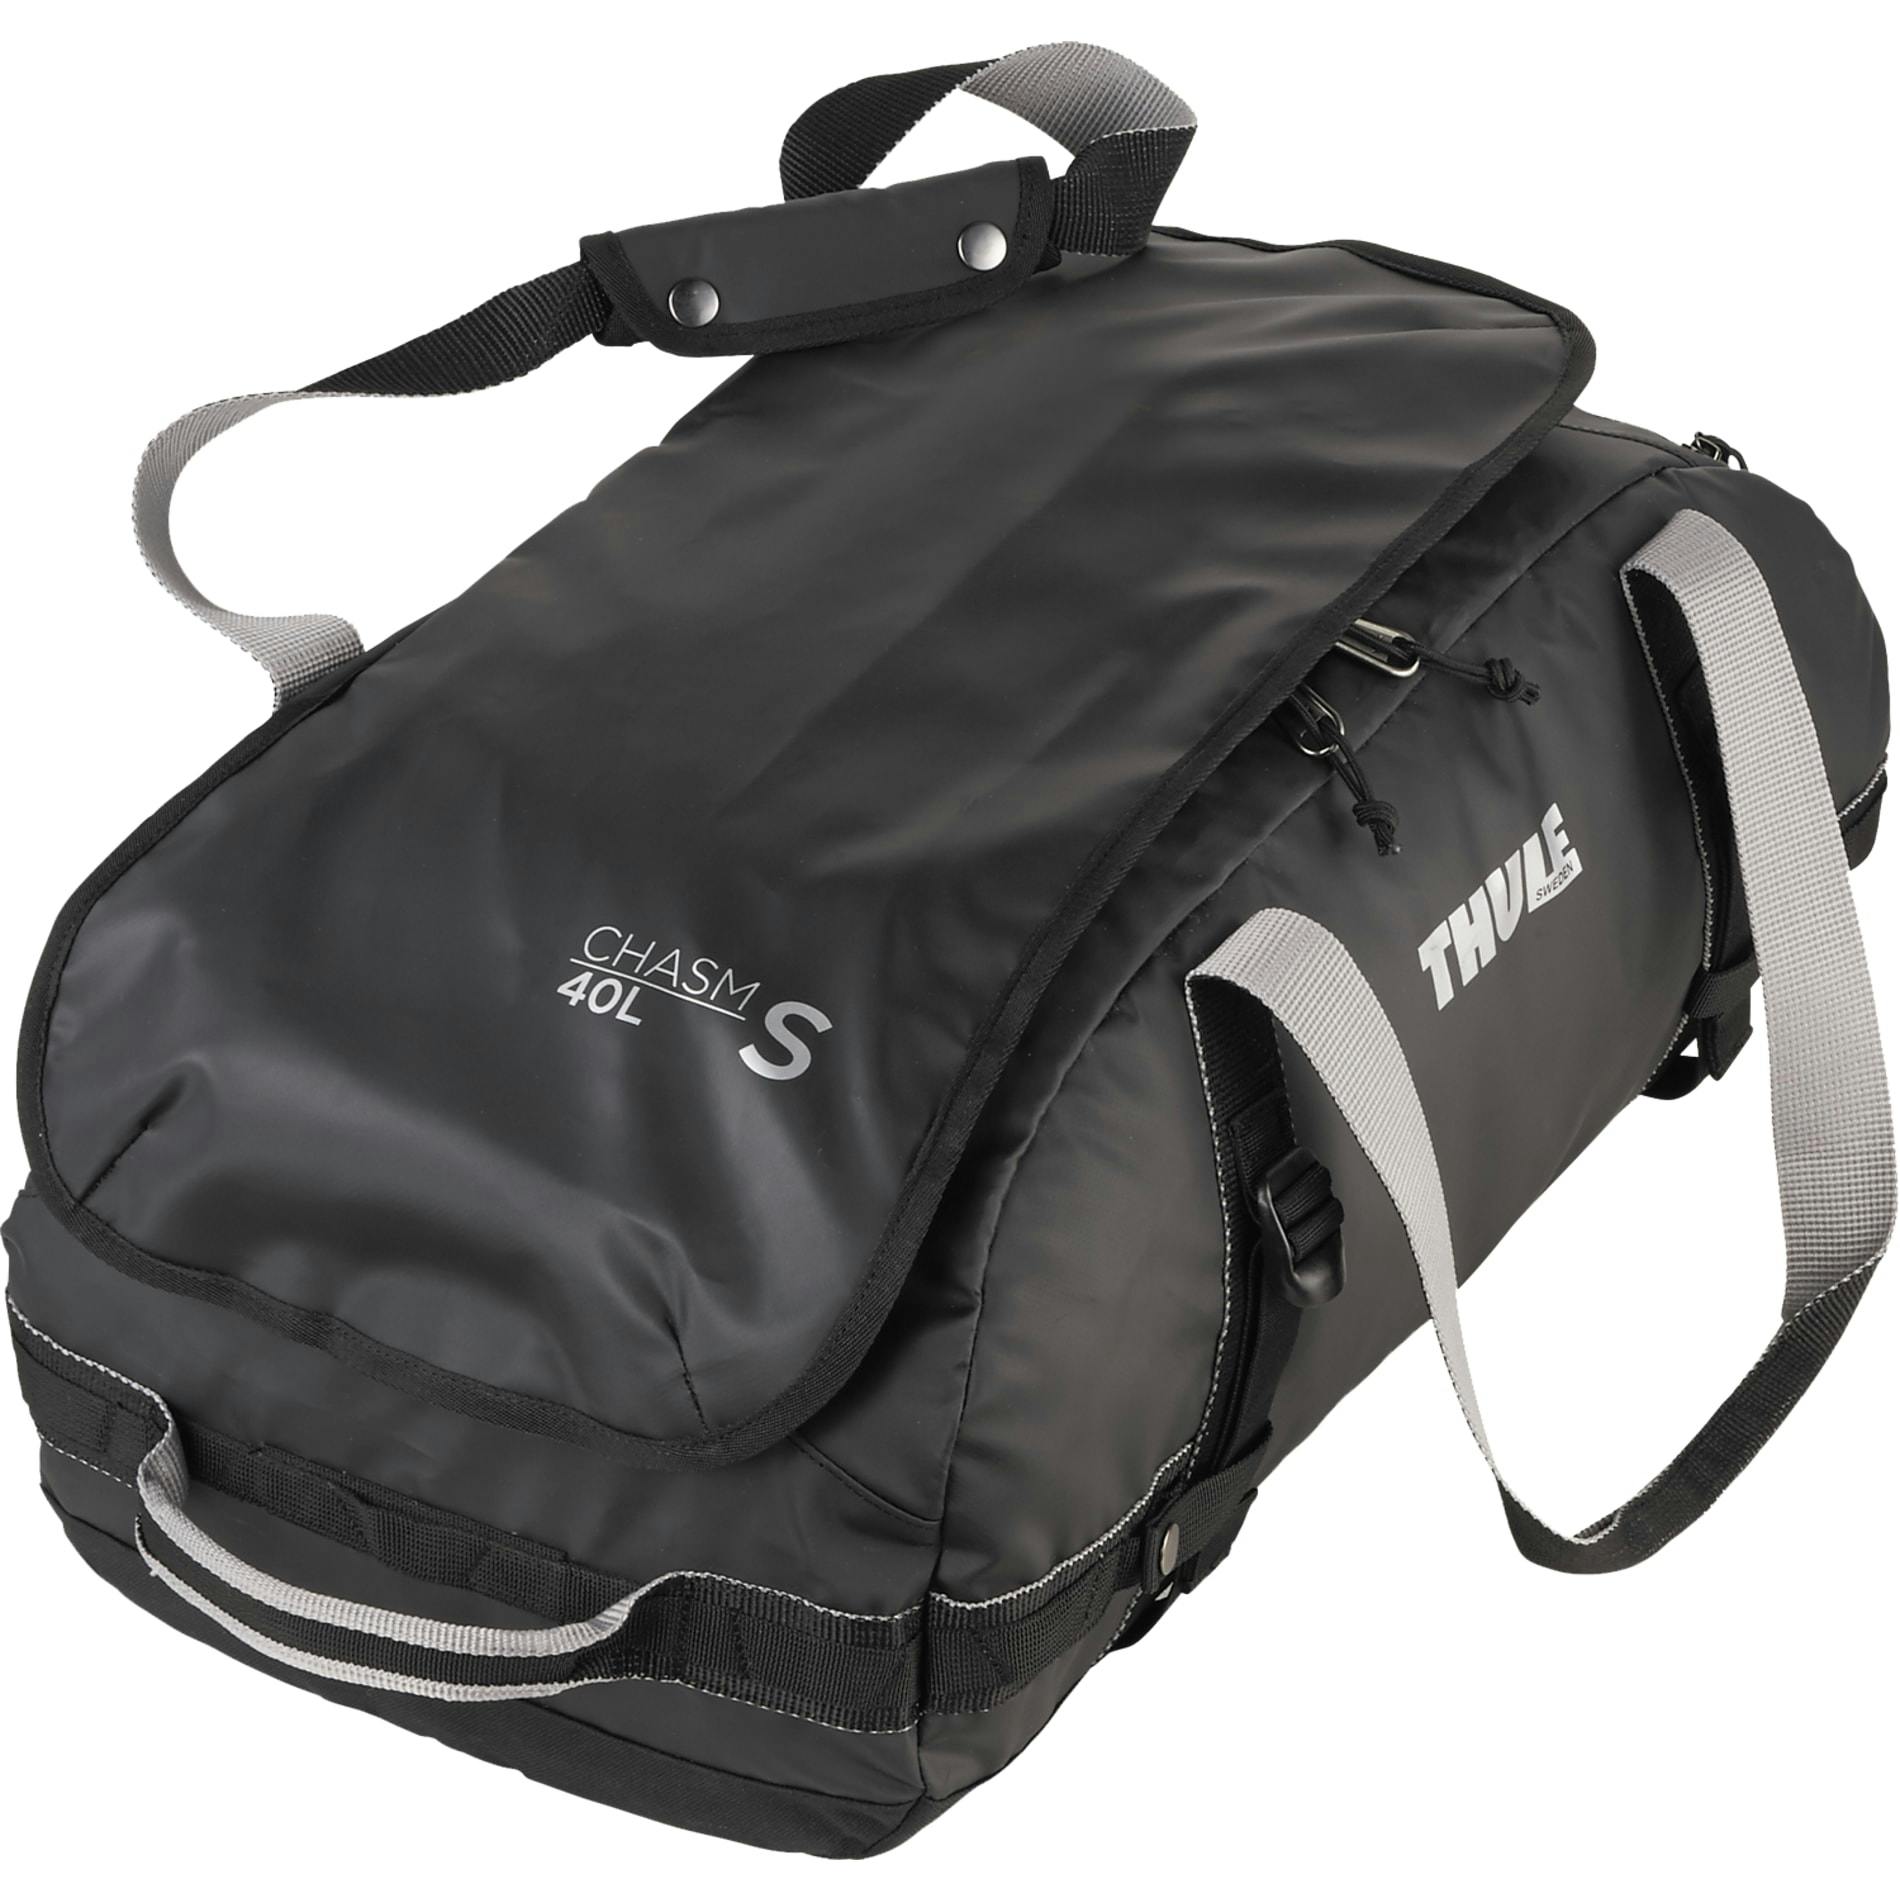 Thule® Chasm 40L Duffel - additional Image 3